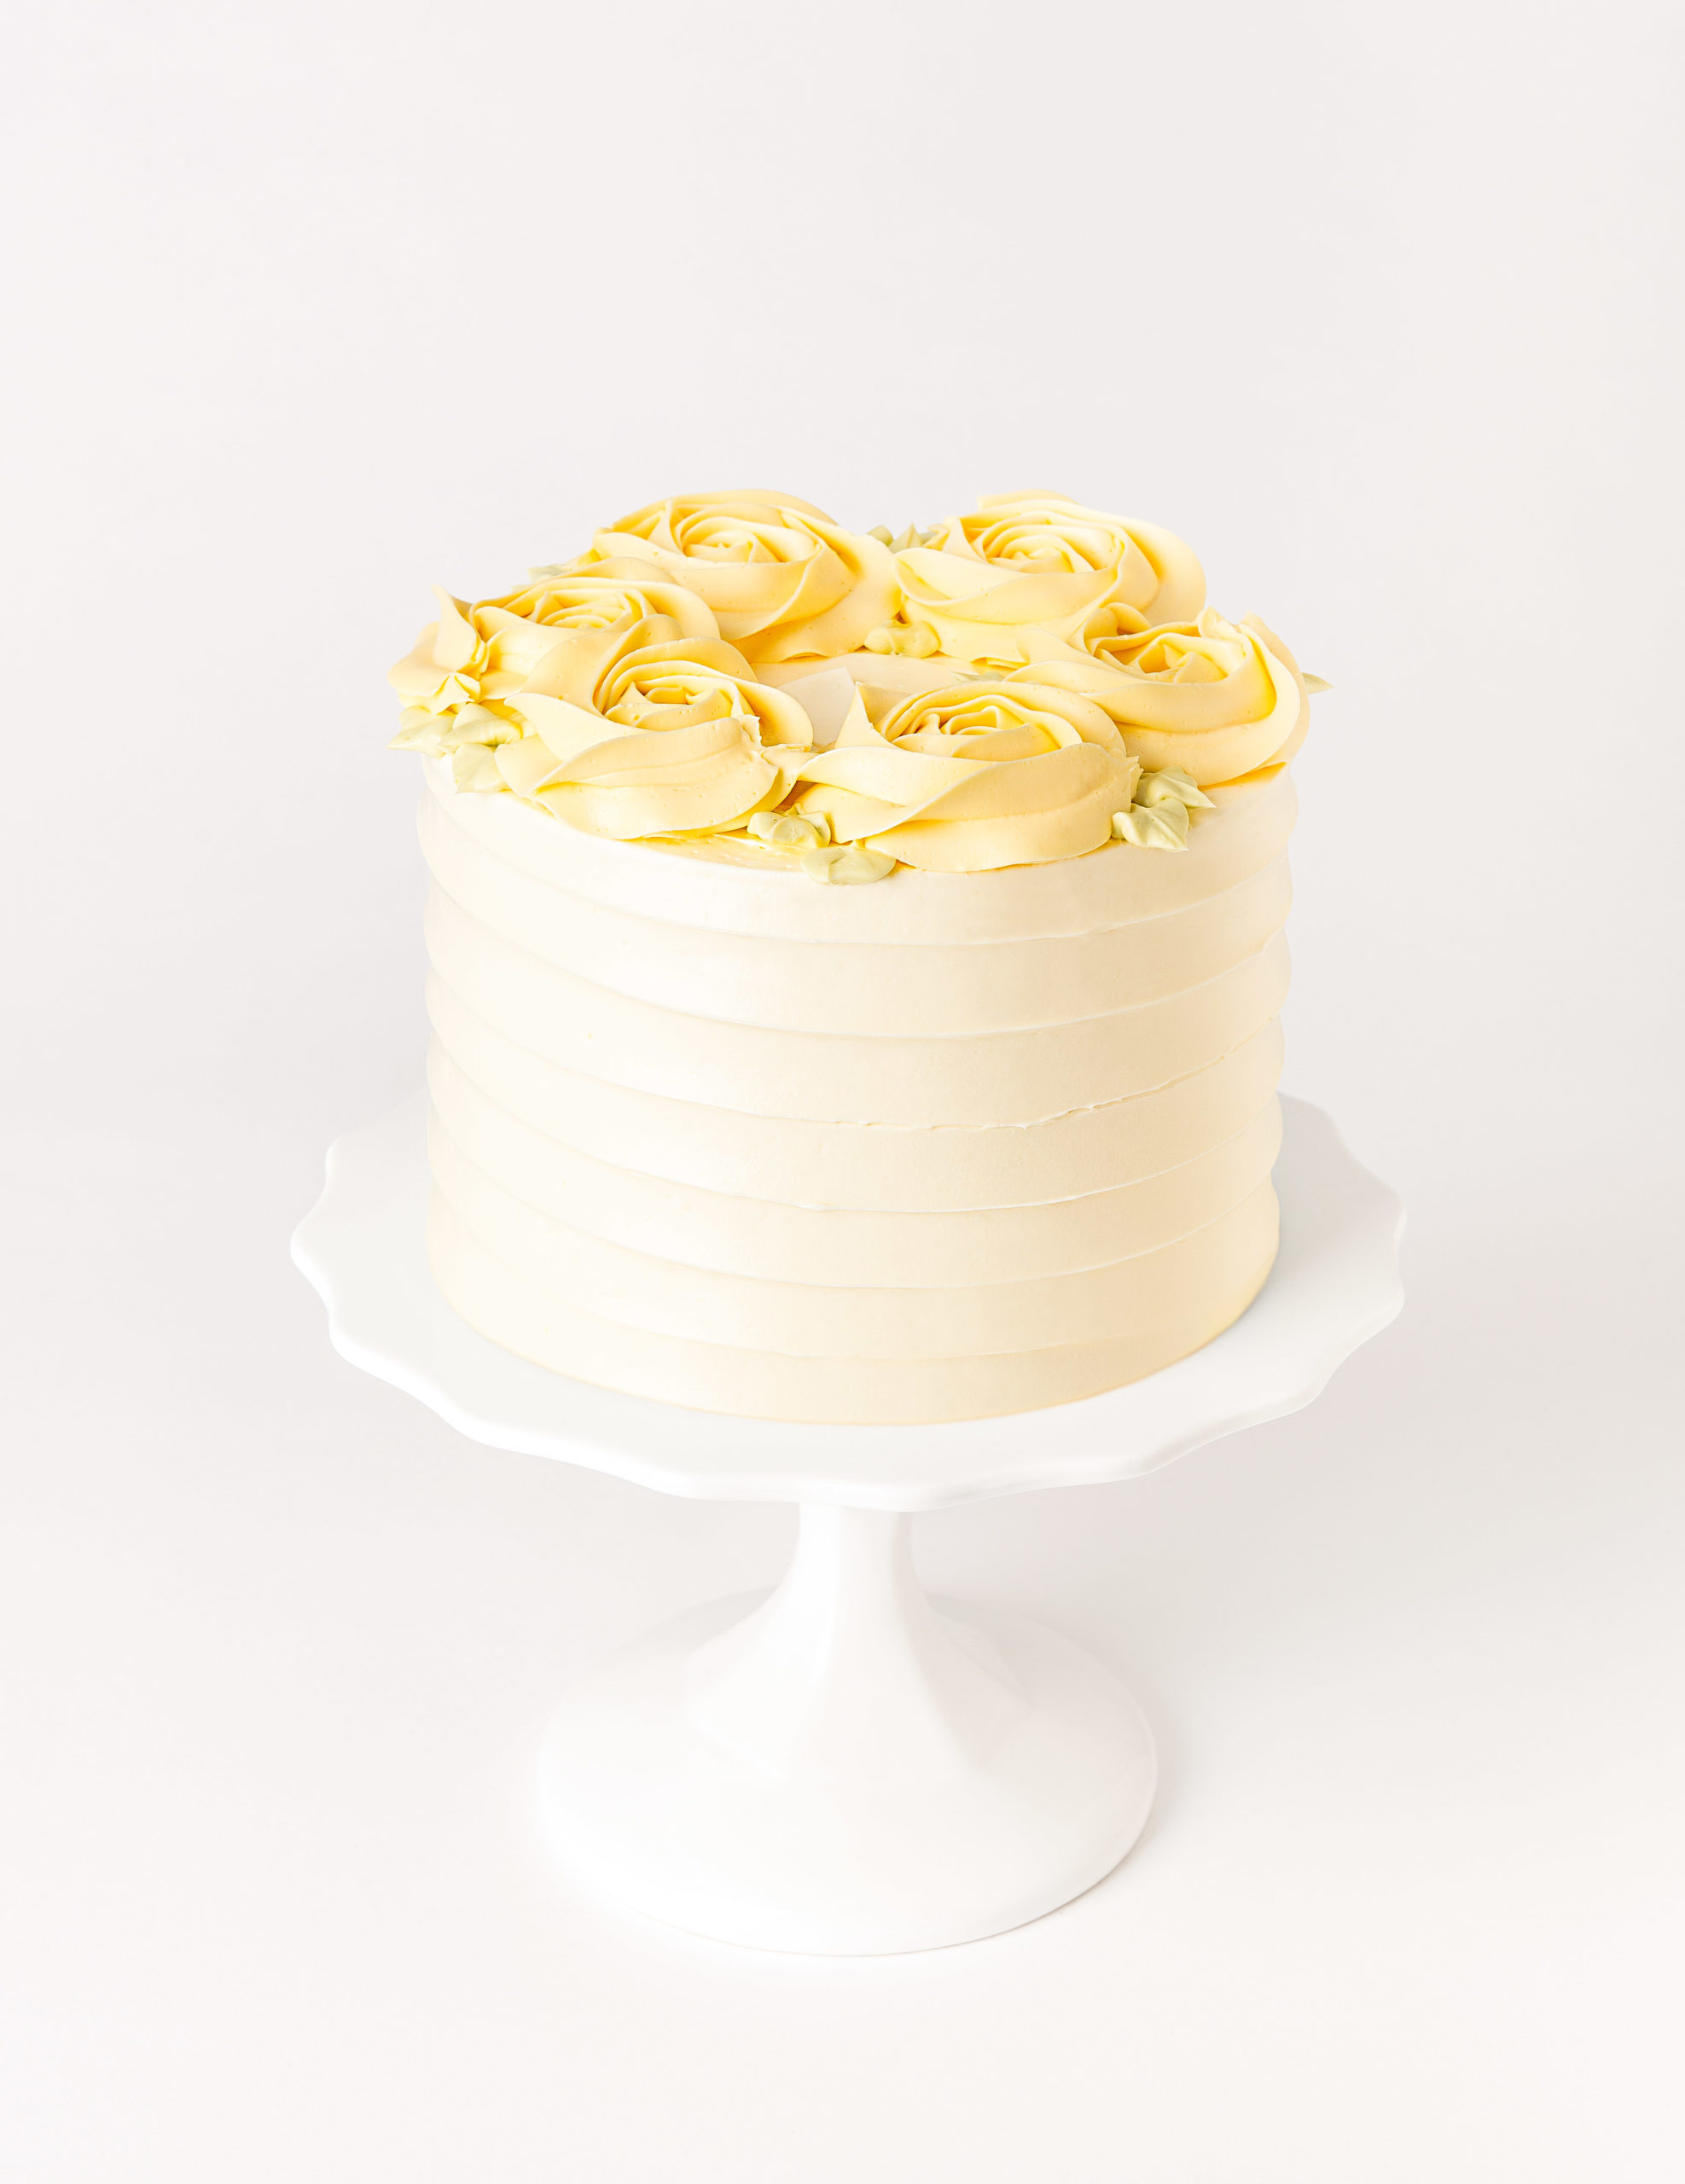 Lemon, Lime & Passion Fruit Cake in Partnership with The Happy Egg Co. -  JUNIPER CAKERY | Cakes and Sweet Treats!